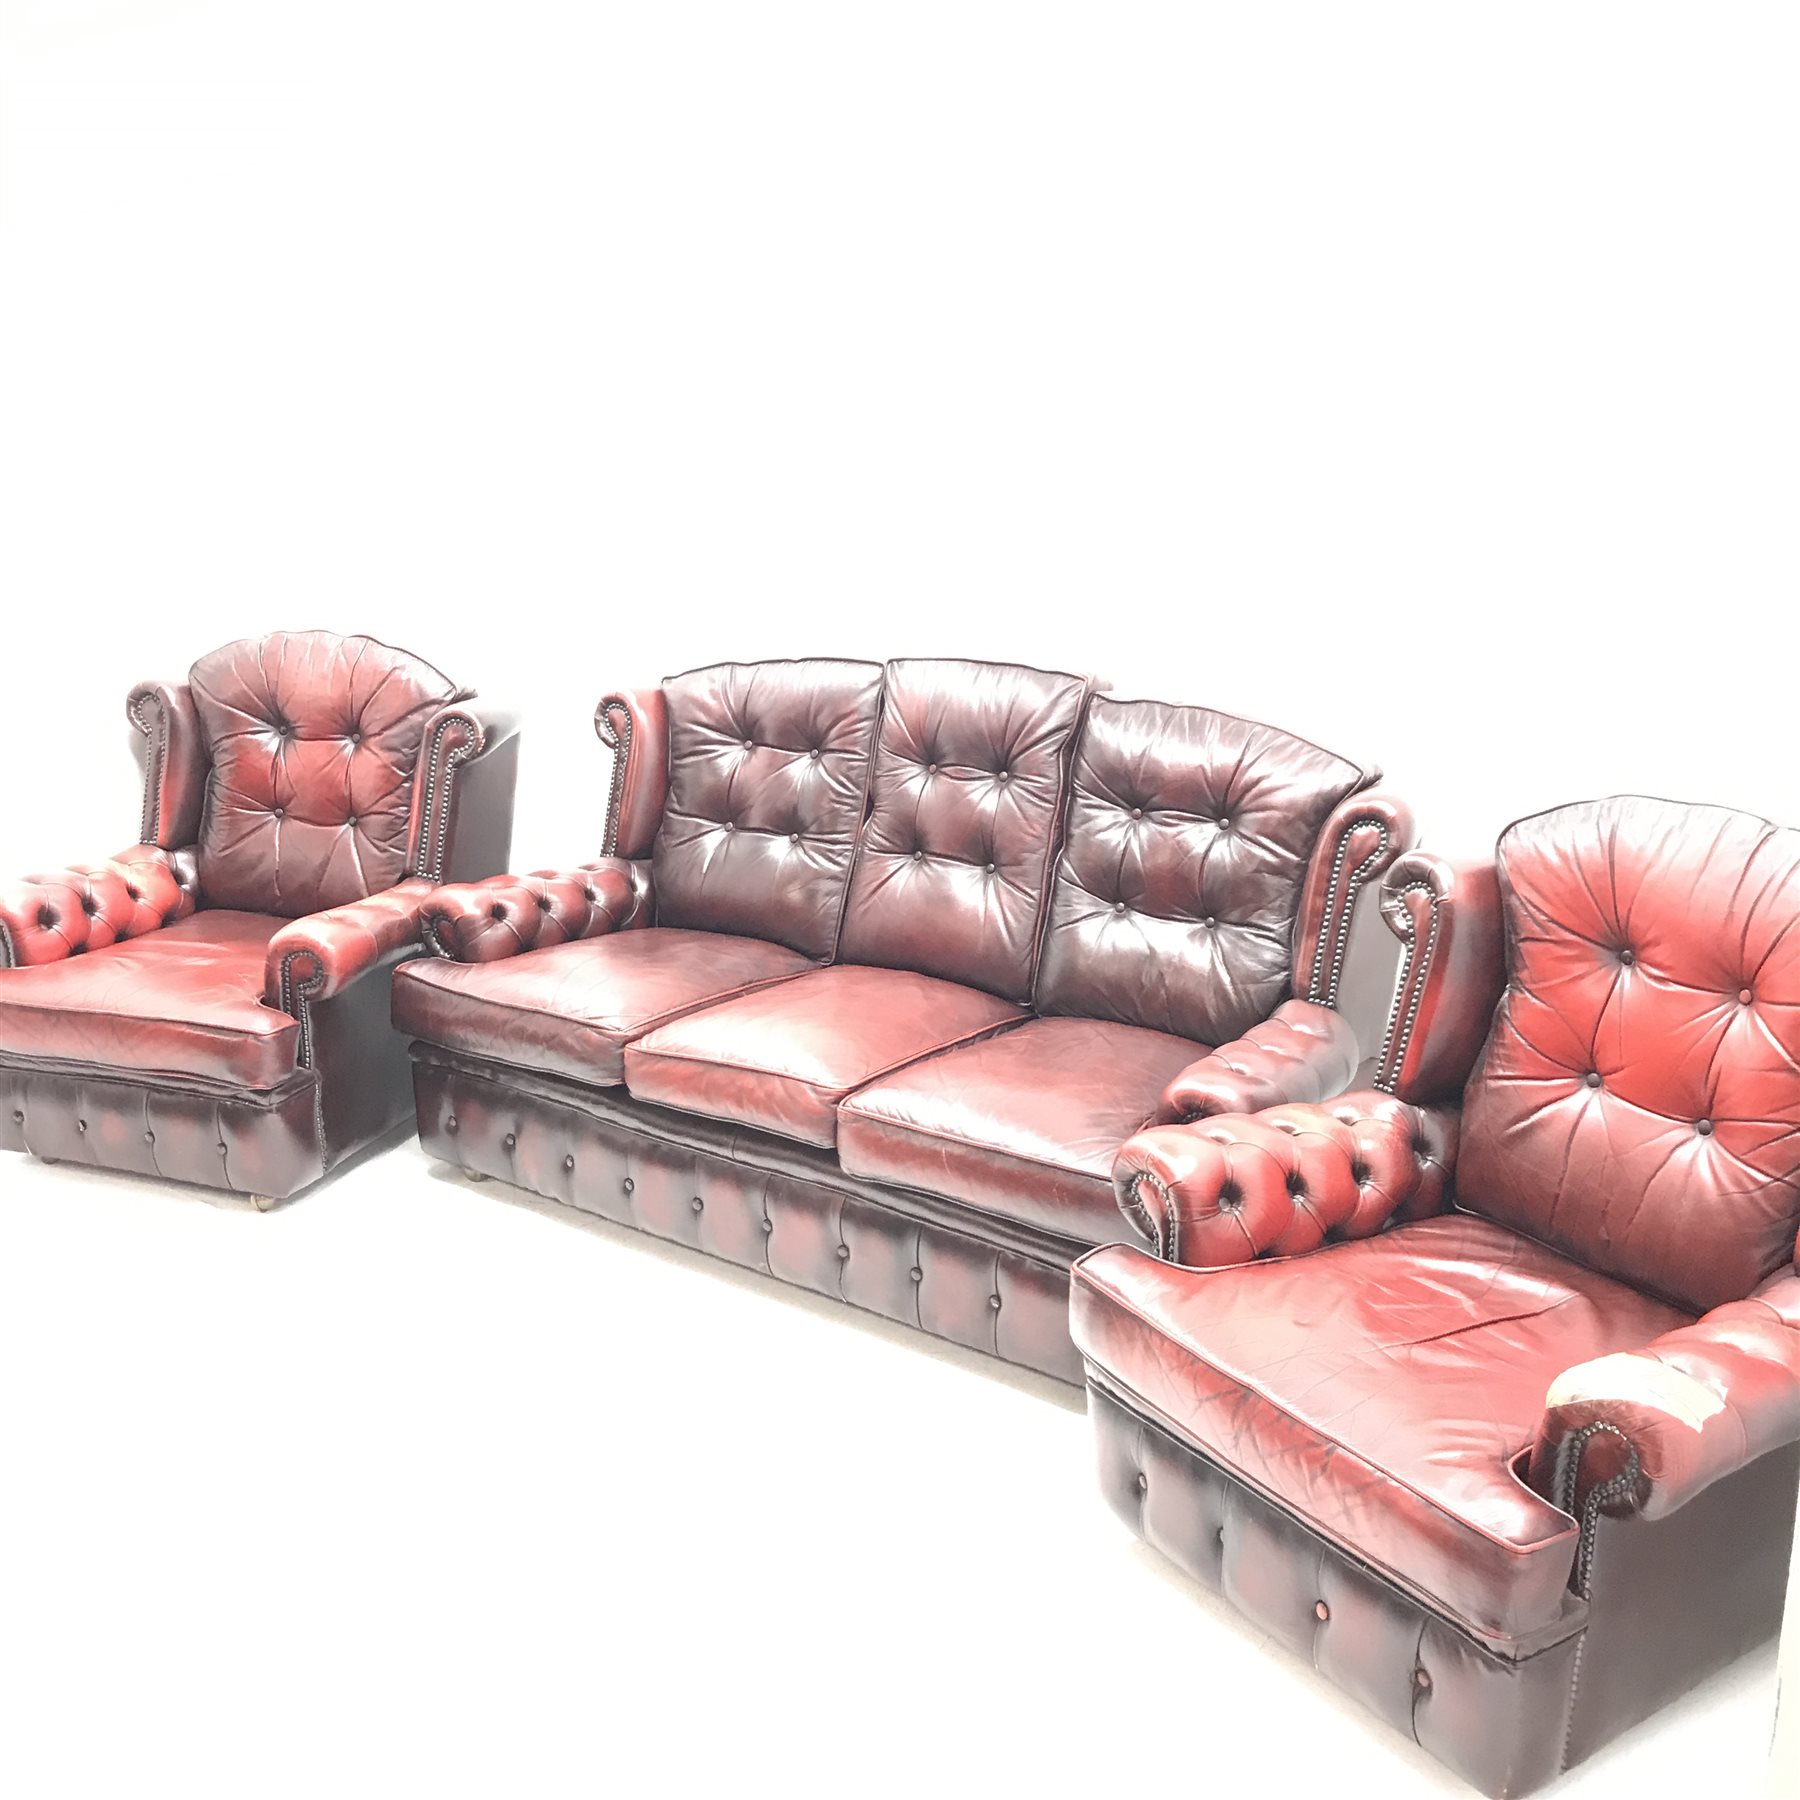 Georgian style three seat sofa upholstered in deep buttoned vintage red leather (W175cm) and pair of - Image 2 of 10